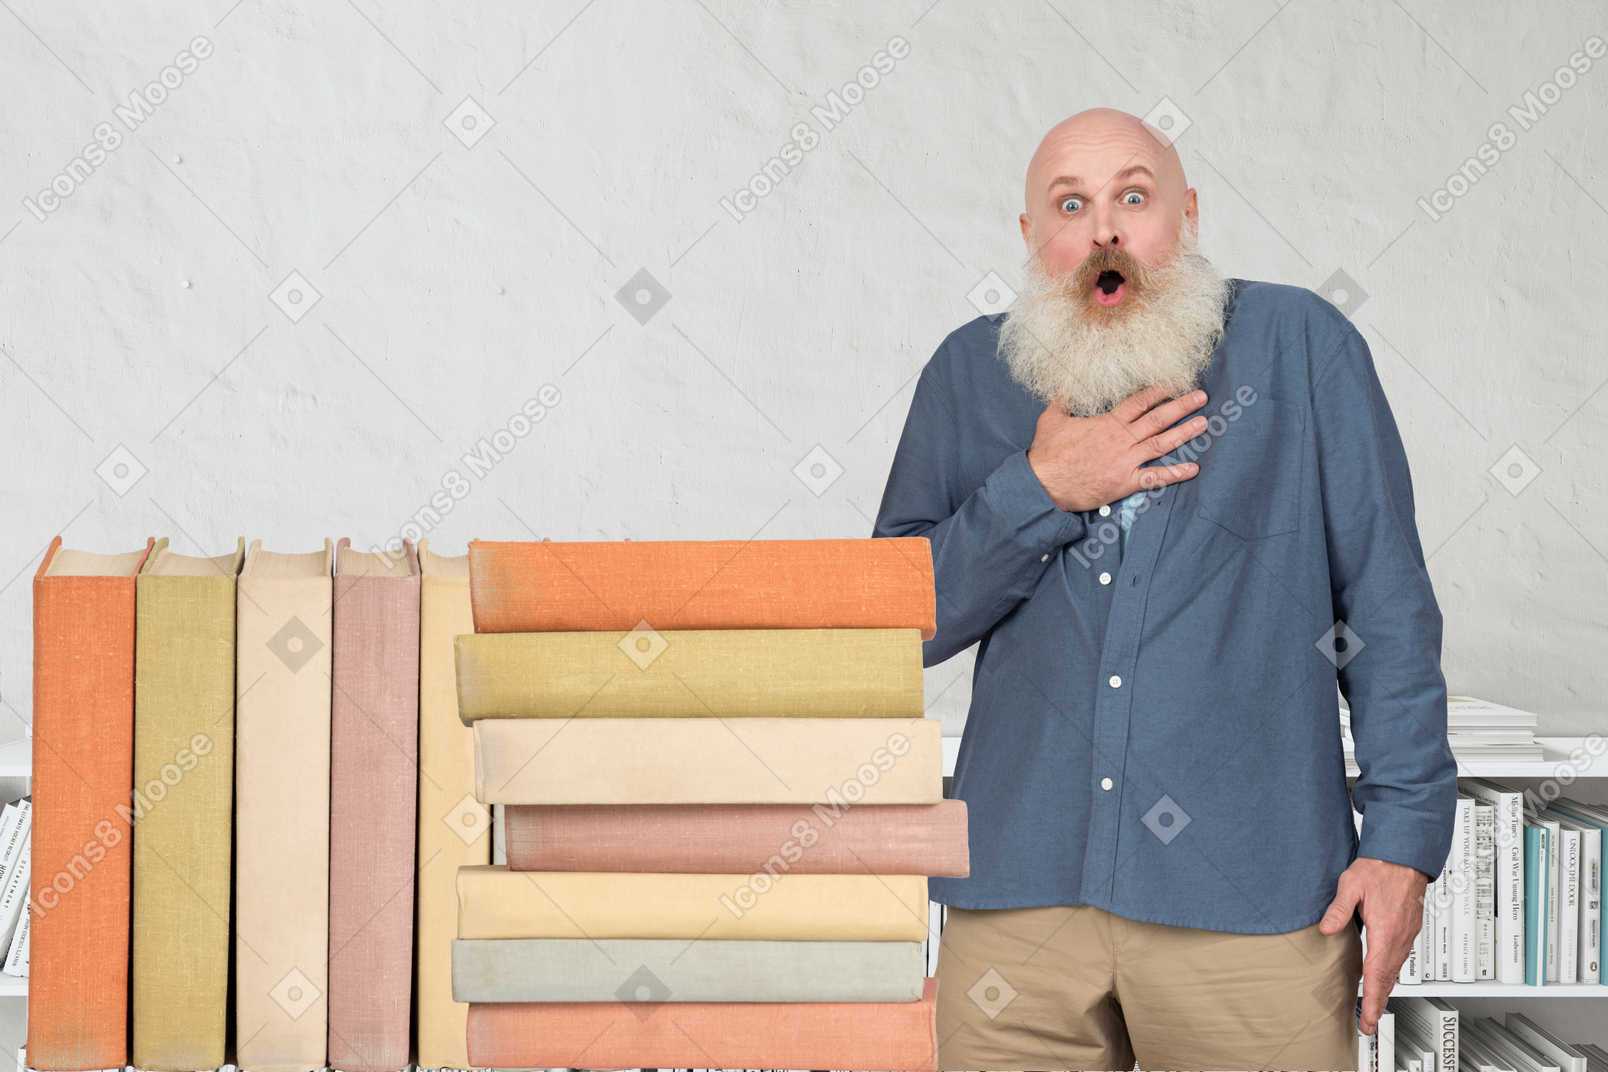 Surprised man standing next to a stack of giant books